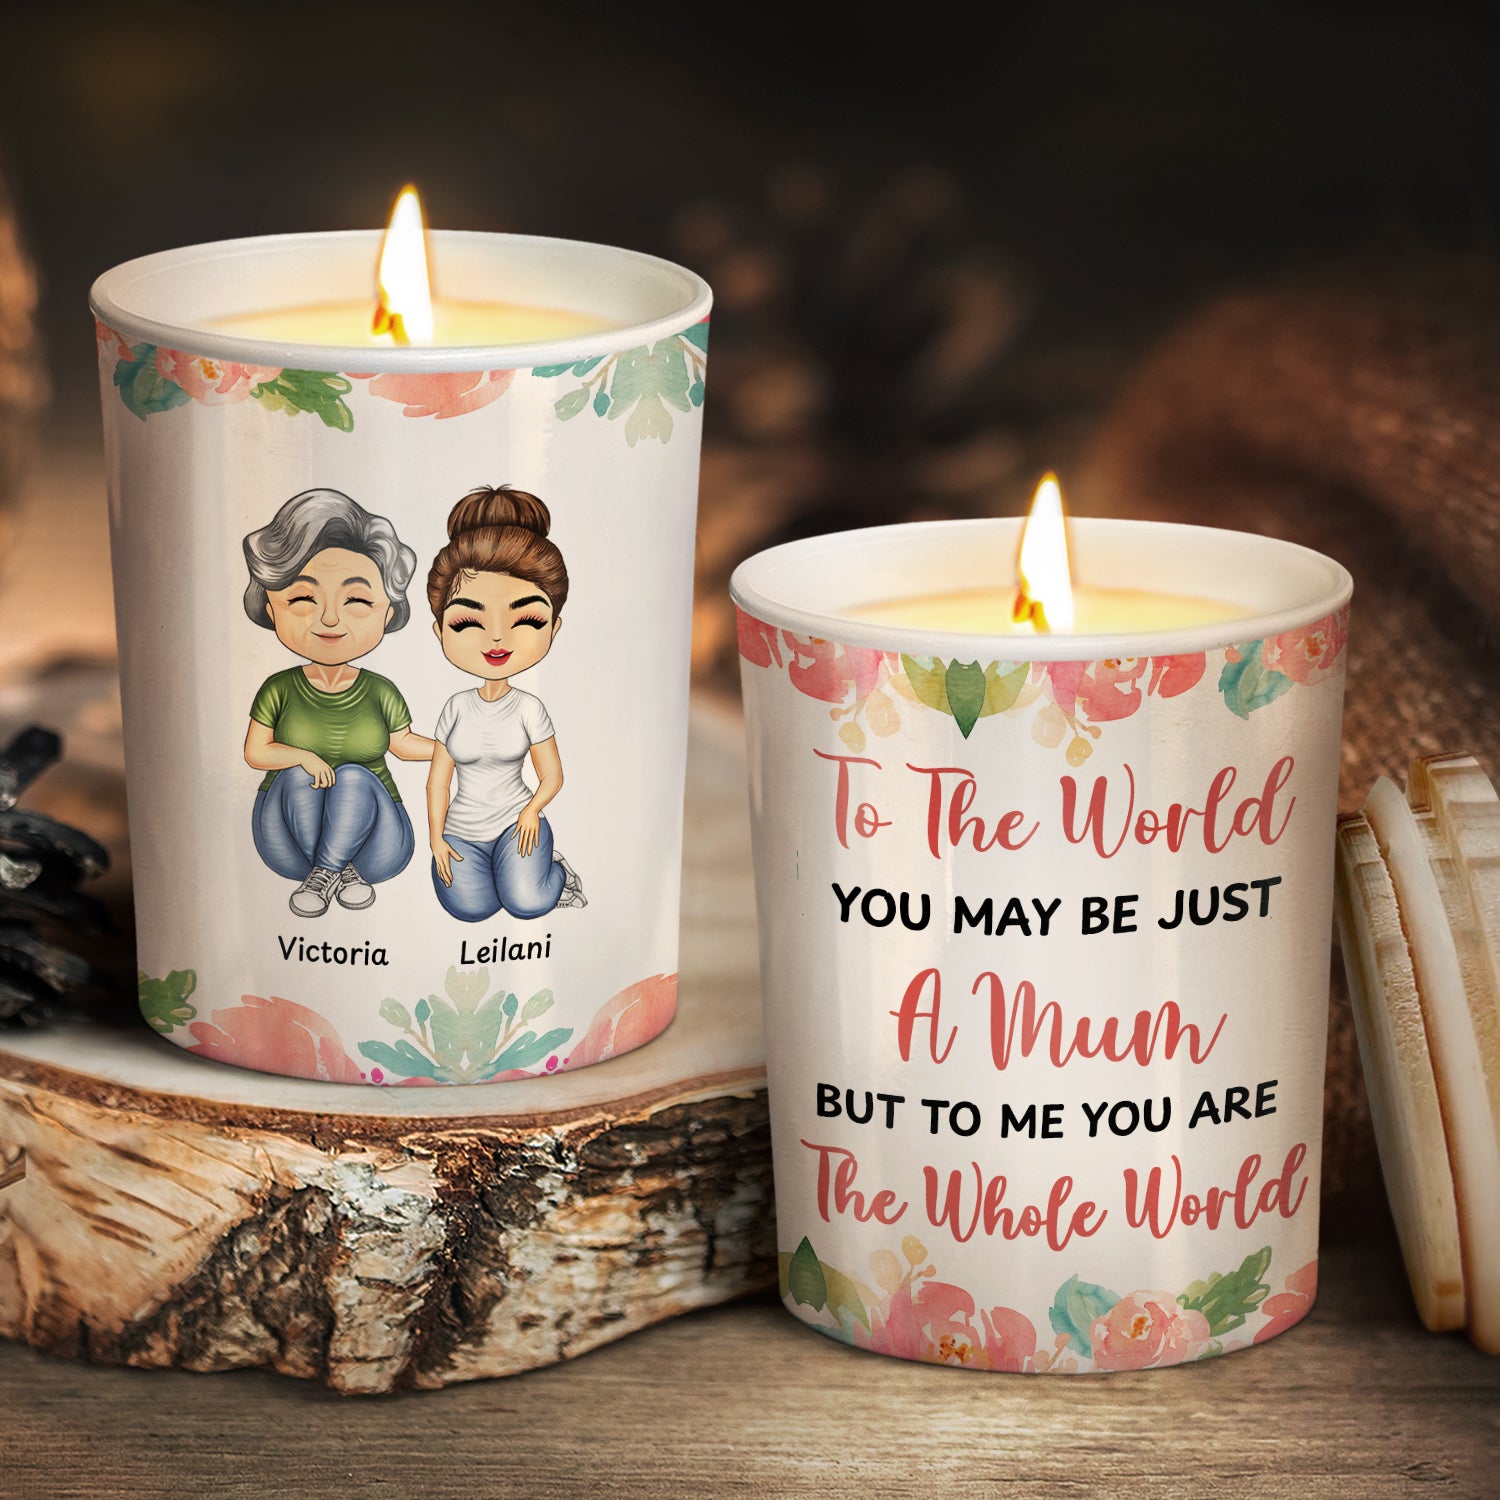 To The World You May Be Just A Mum - Loving Gift For Mother, Mama - Personalized Scented Candle With Wooden Lid